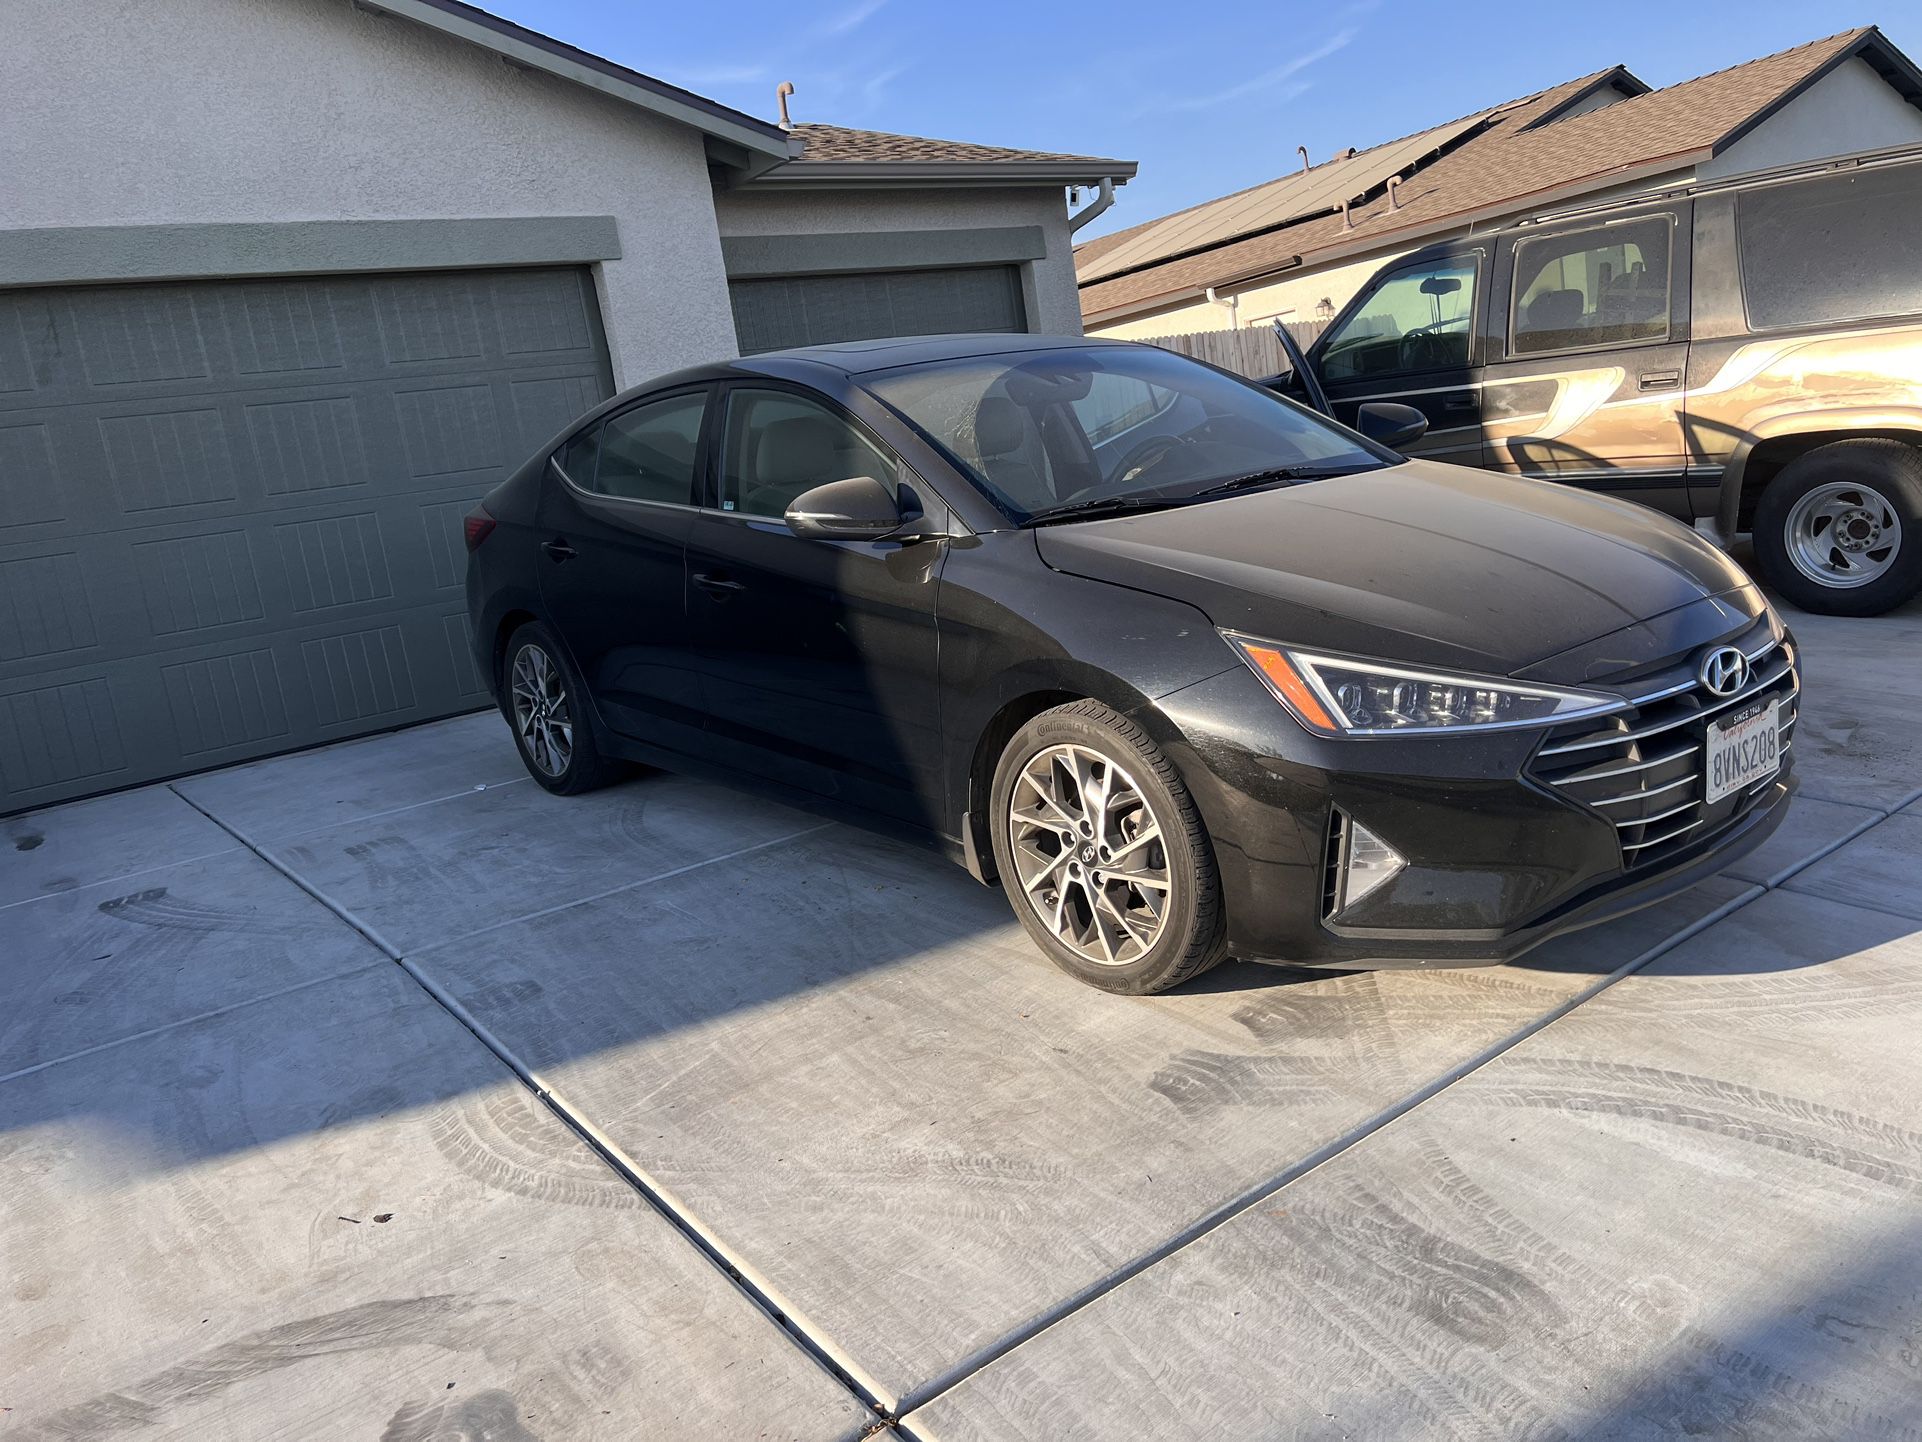 LVS for Sale in Selma, CA - OfferUp